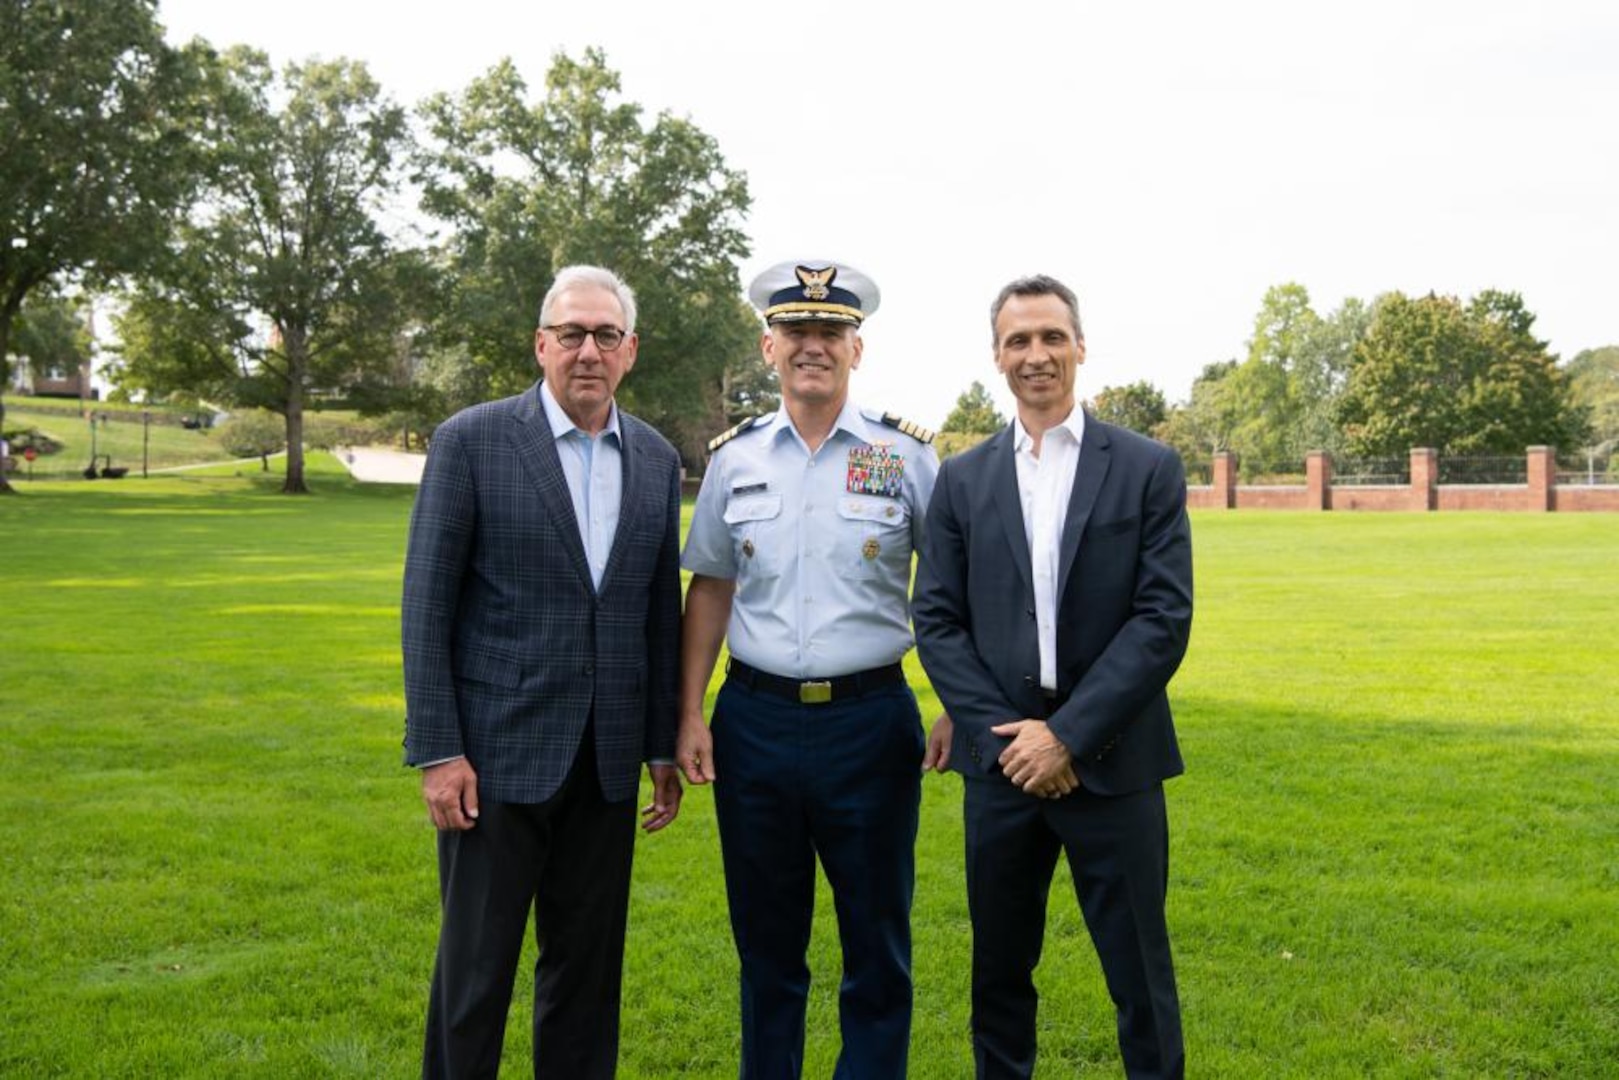 From left, Sal Paolantonio, ESPN reporter, Capt. Rick Wester, Assistant Superintendent of the Coast Guard Academy and James Pitaro, President of ESPN, pose for a group photo on the academy's parade field, Sep. 28, 2021. ESPN was filming with the Coast Guard for their annual Veterans Day special, this year's special is focused on the Coast Guard. (U.S. Coast Guard photo by Petty Officer 3rd Class Matthew Abban)